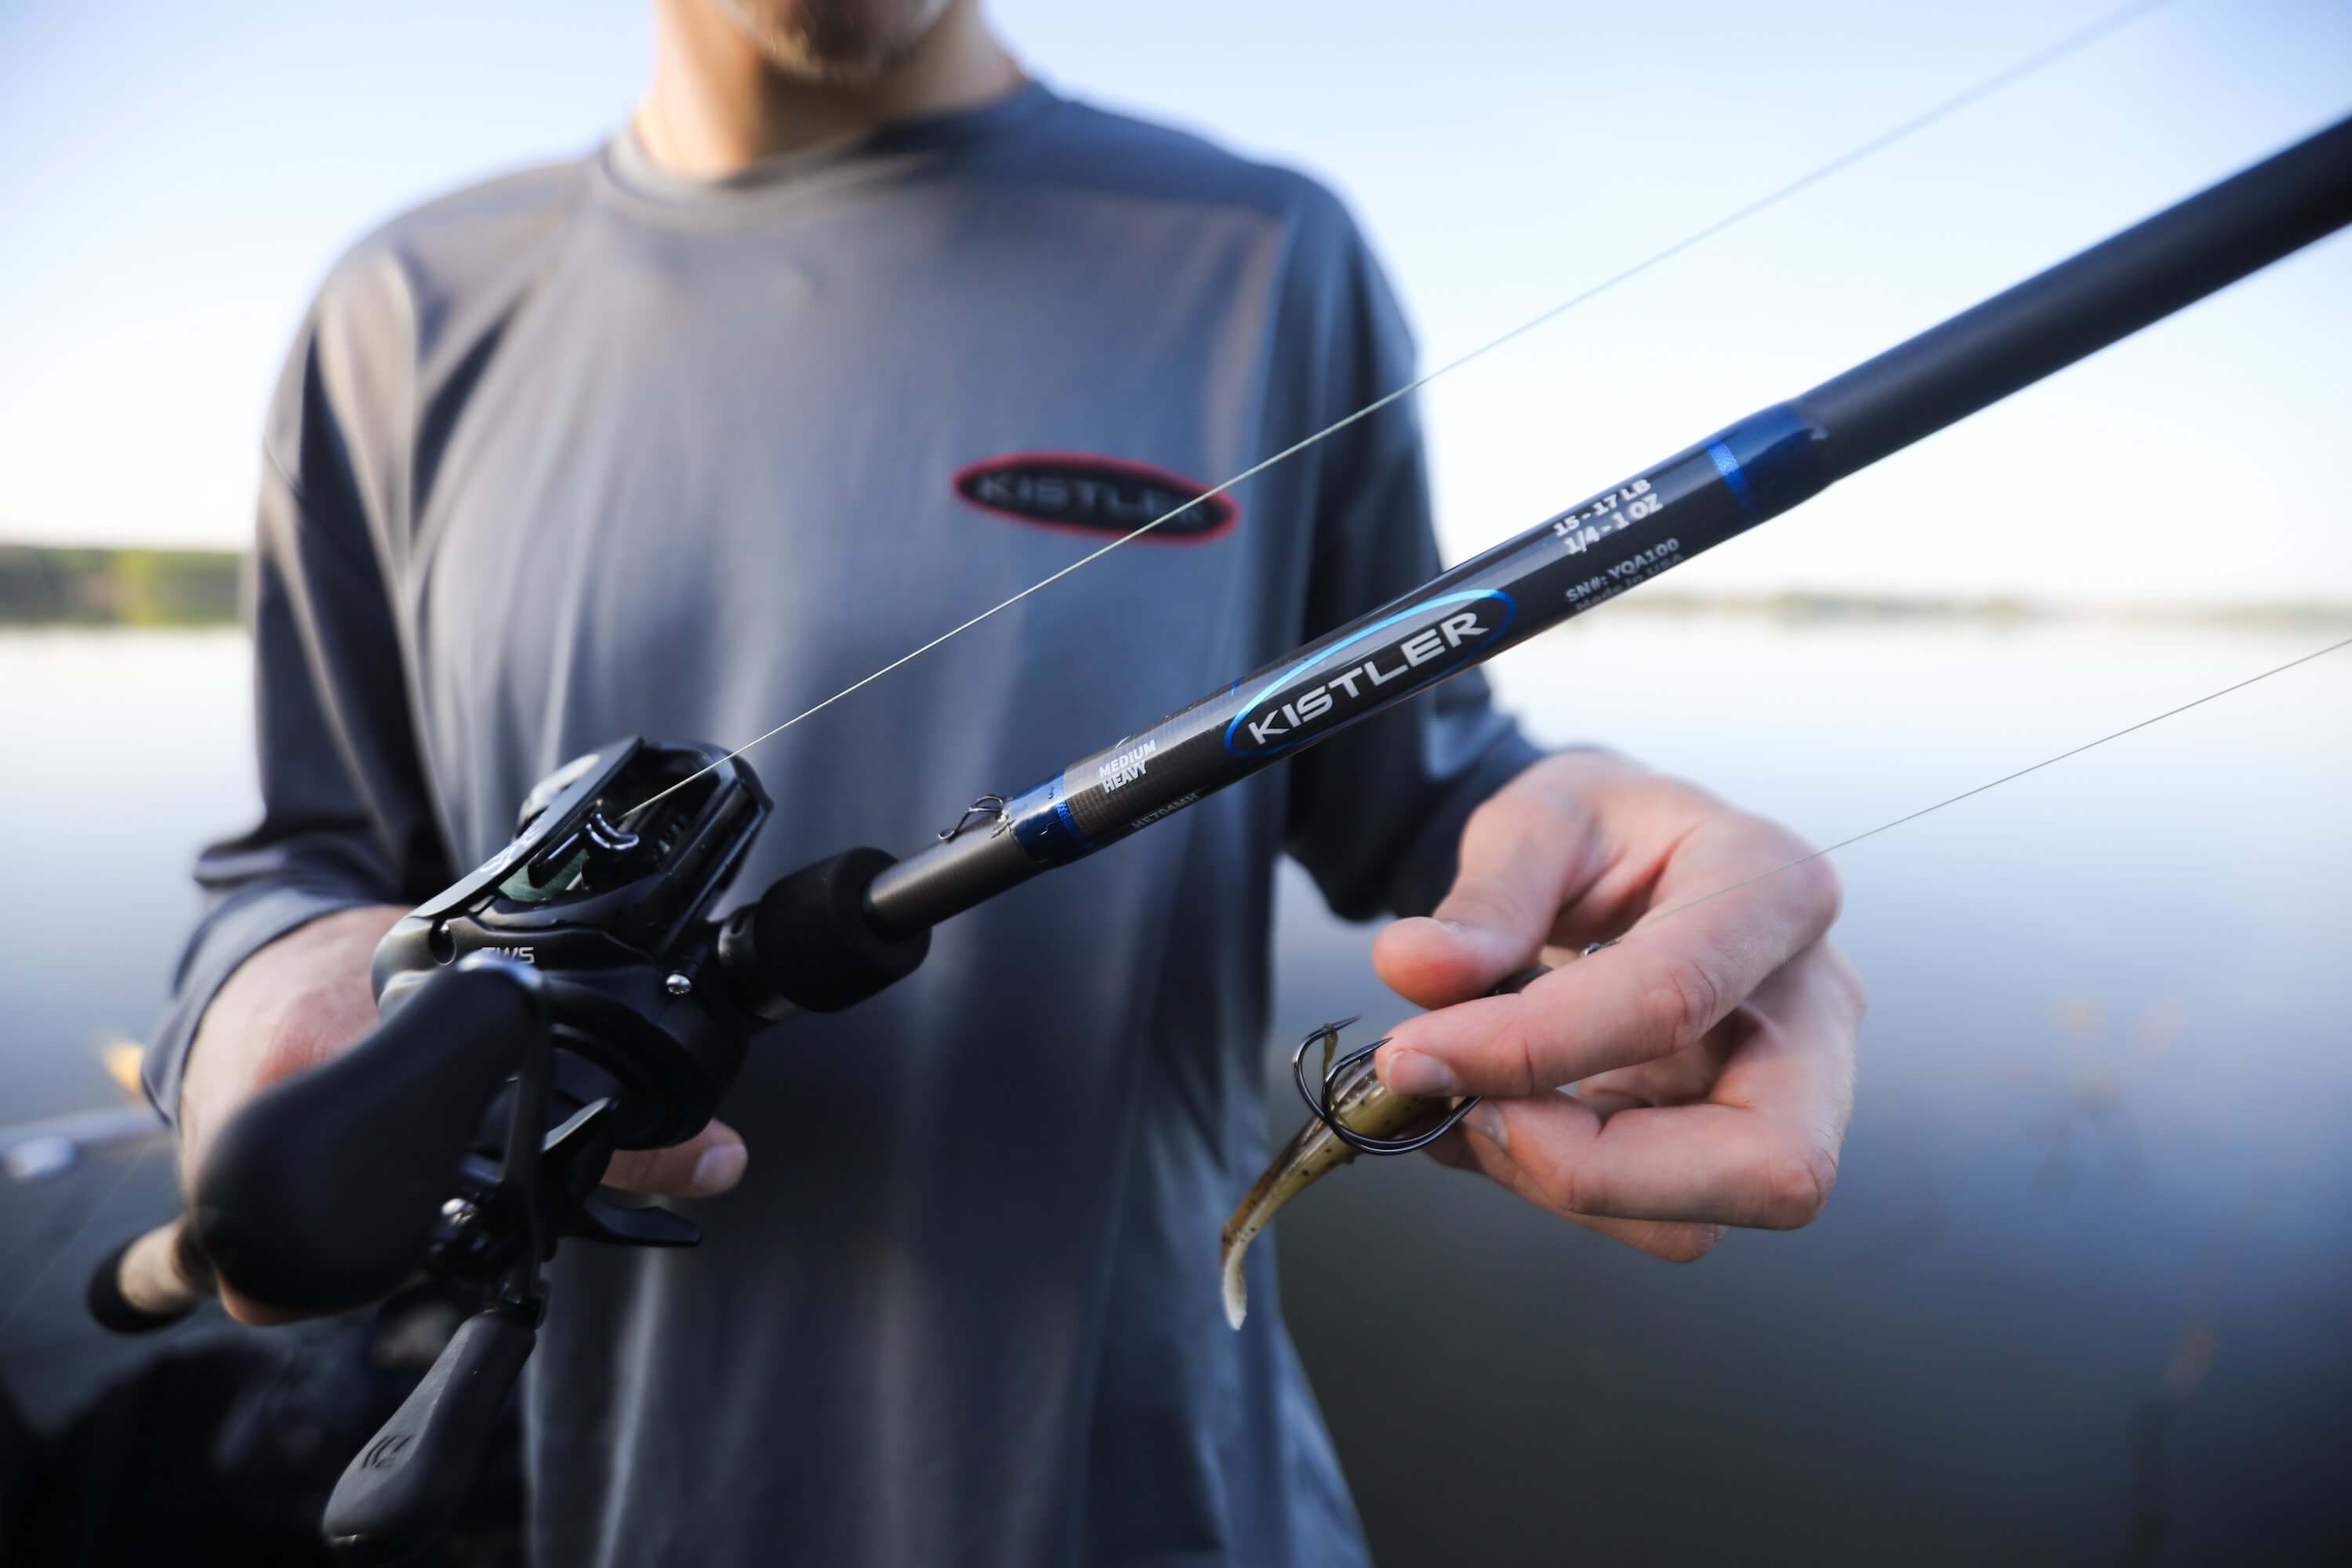 Building Custom Fishing Rods For Over 20 Years - Find Your New